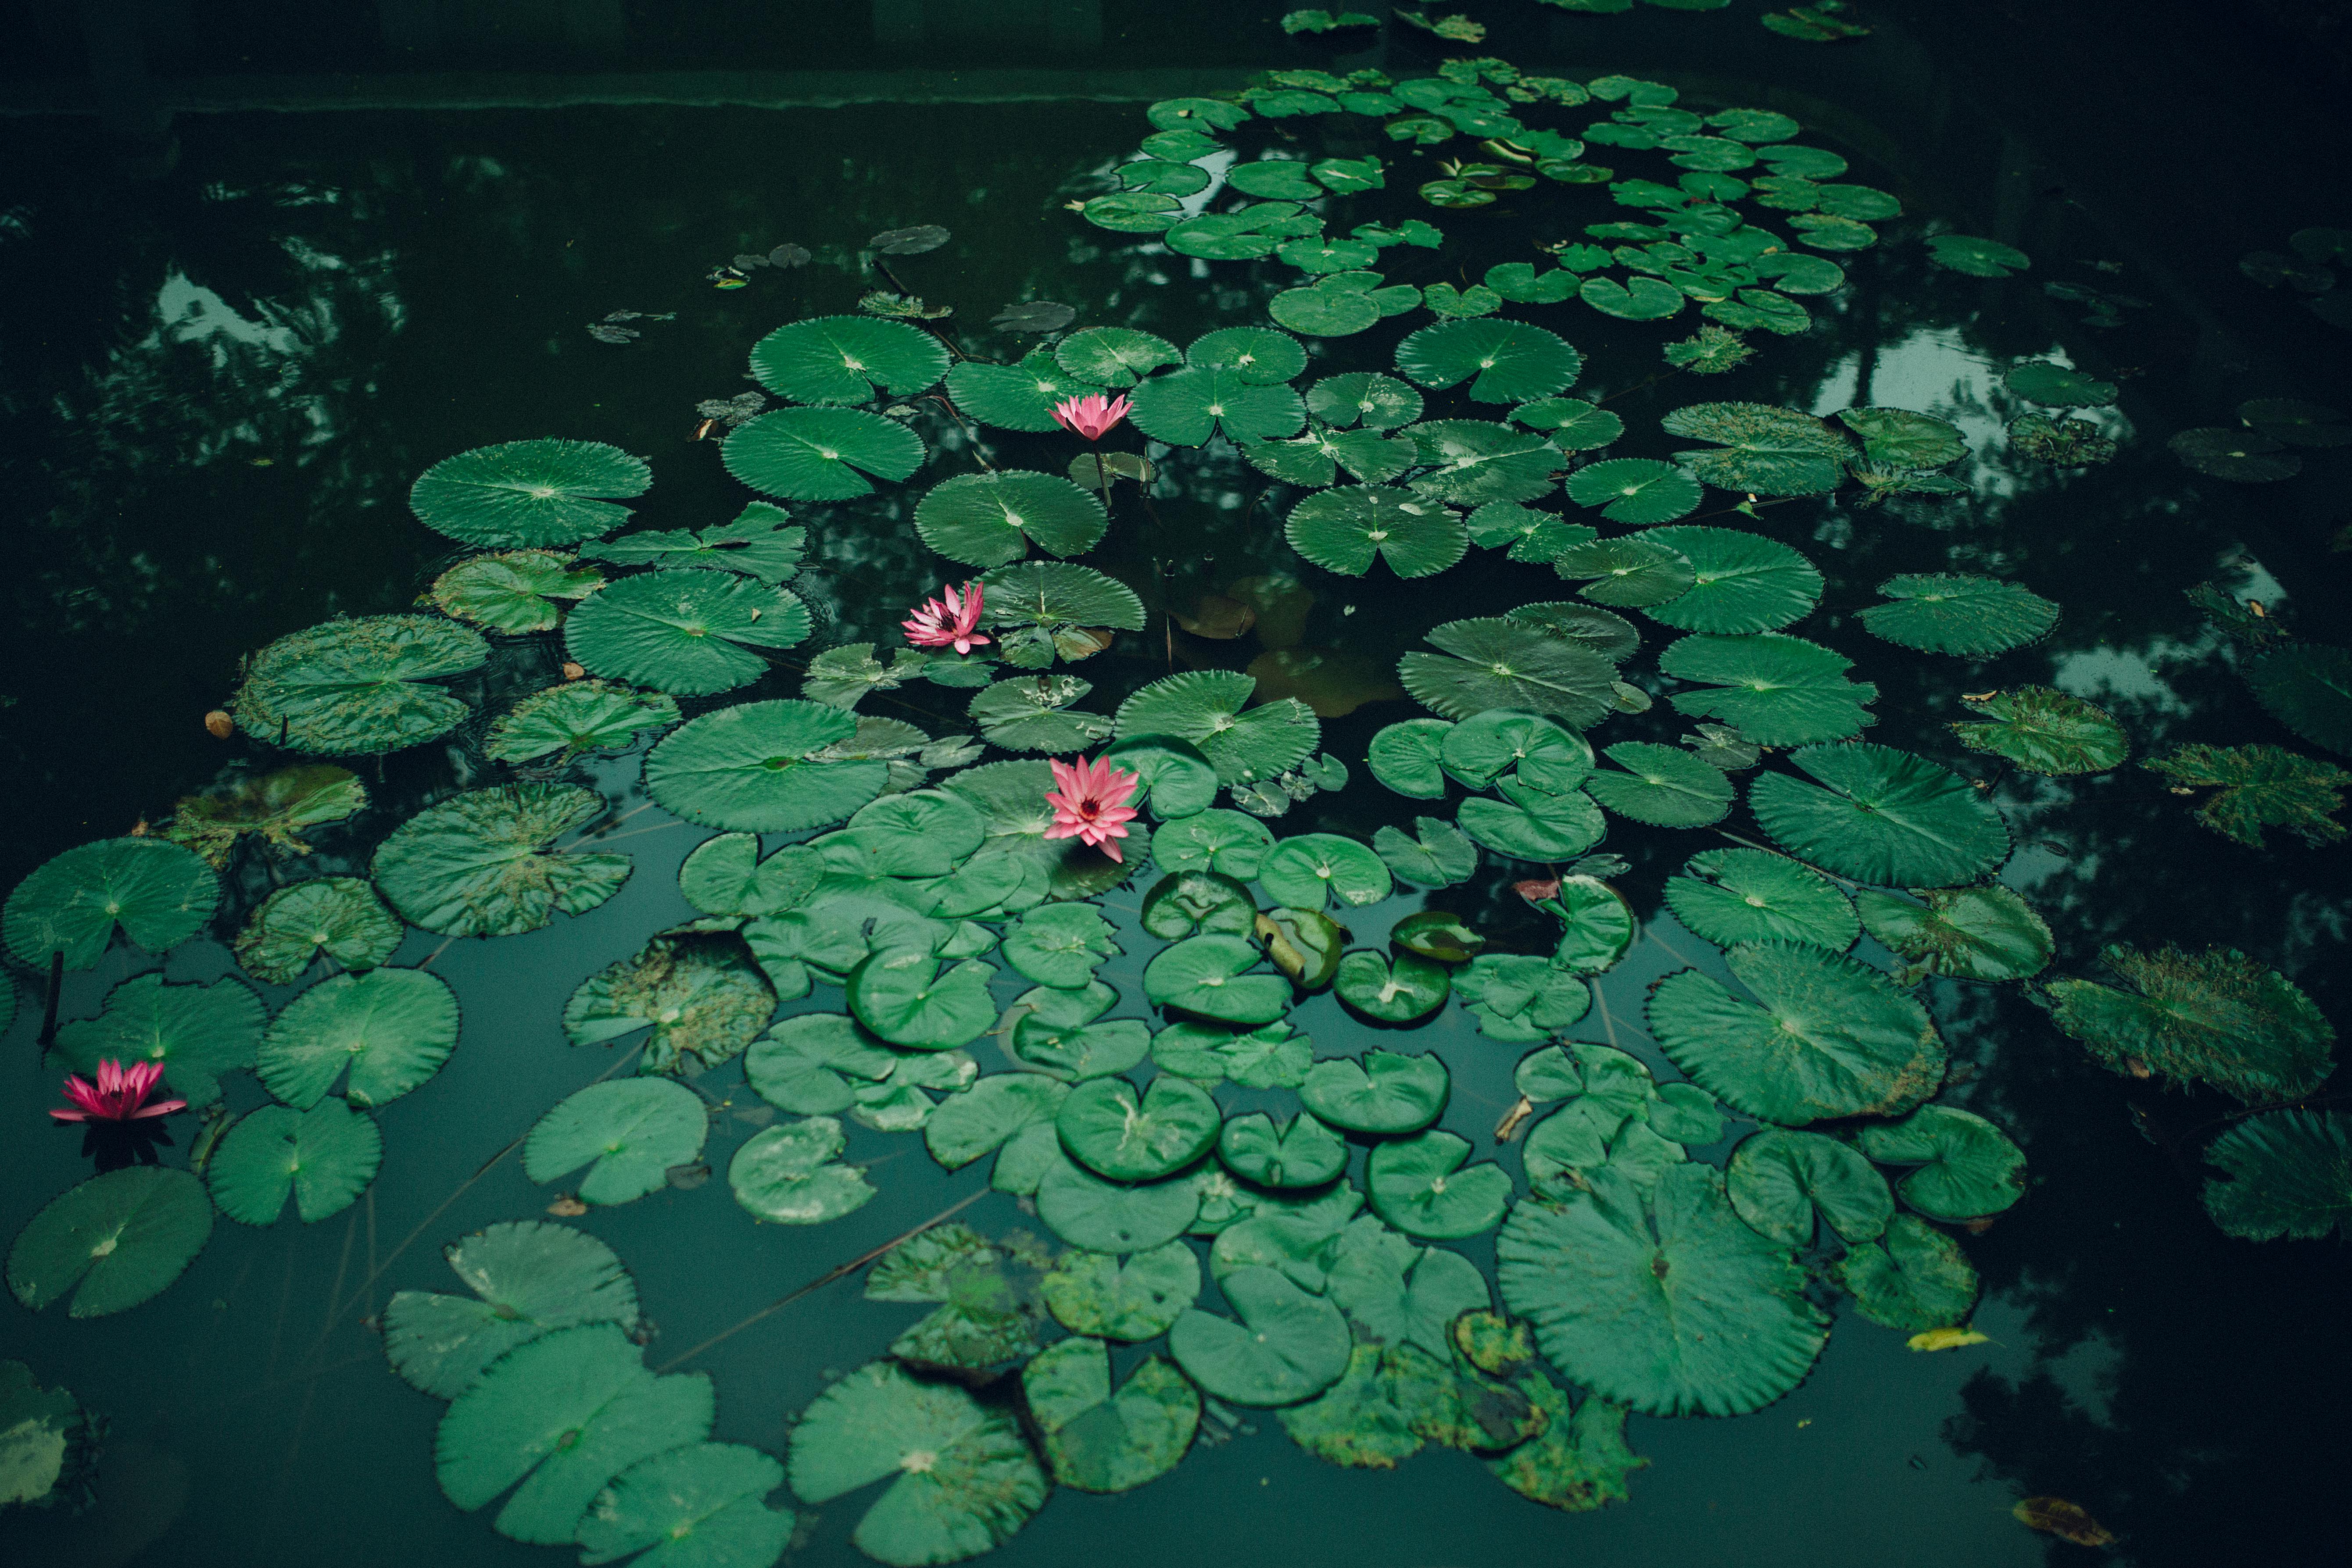 Pond Photos, Download The BEST Free Pond Stock Photos & HD Images